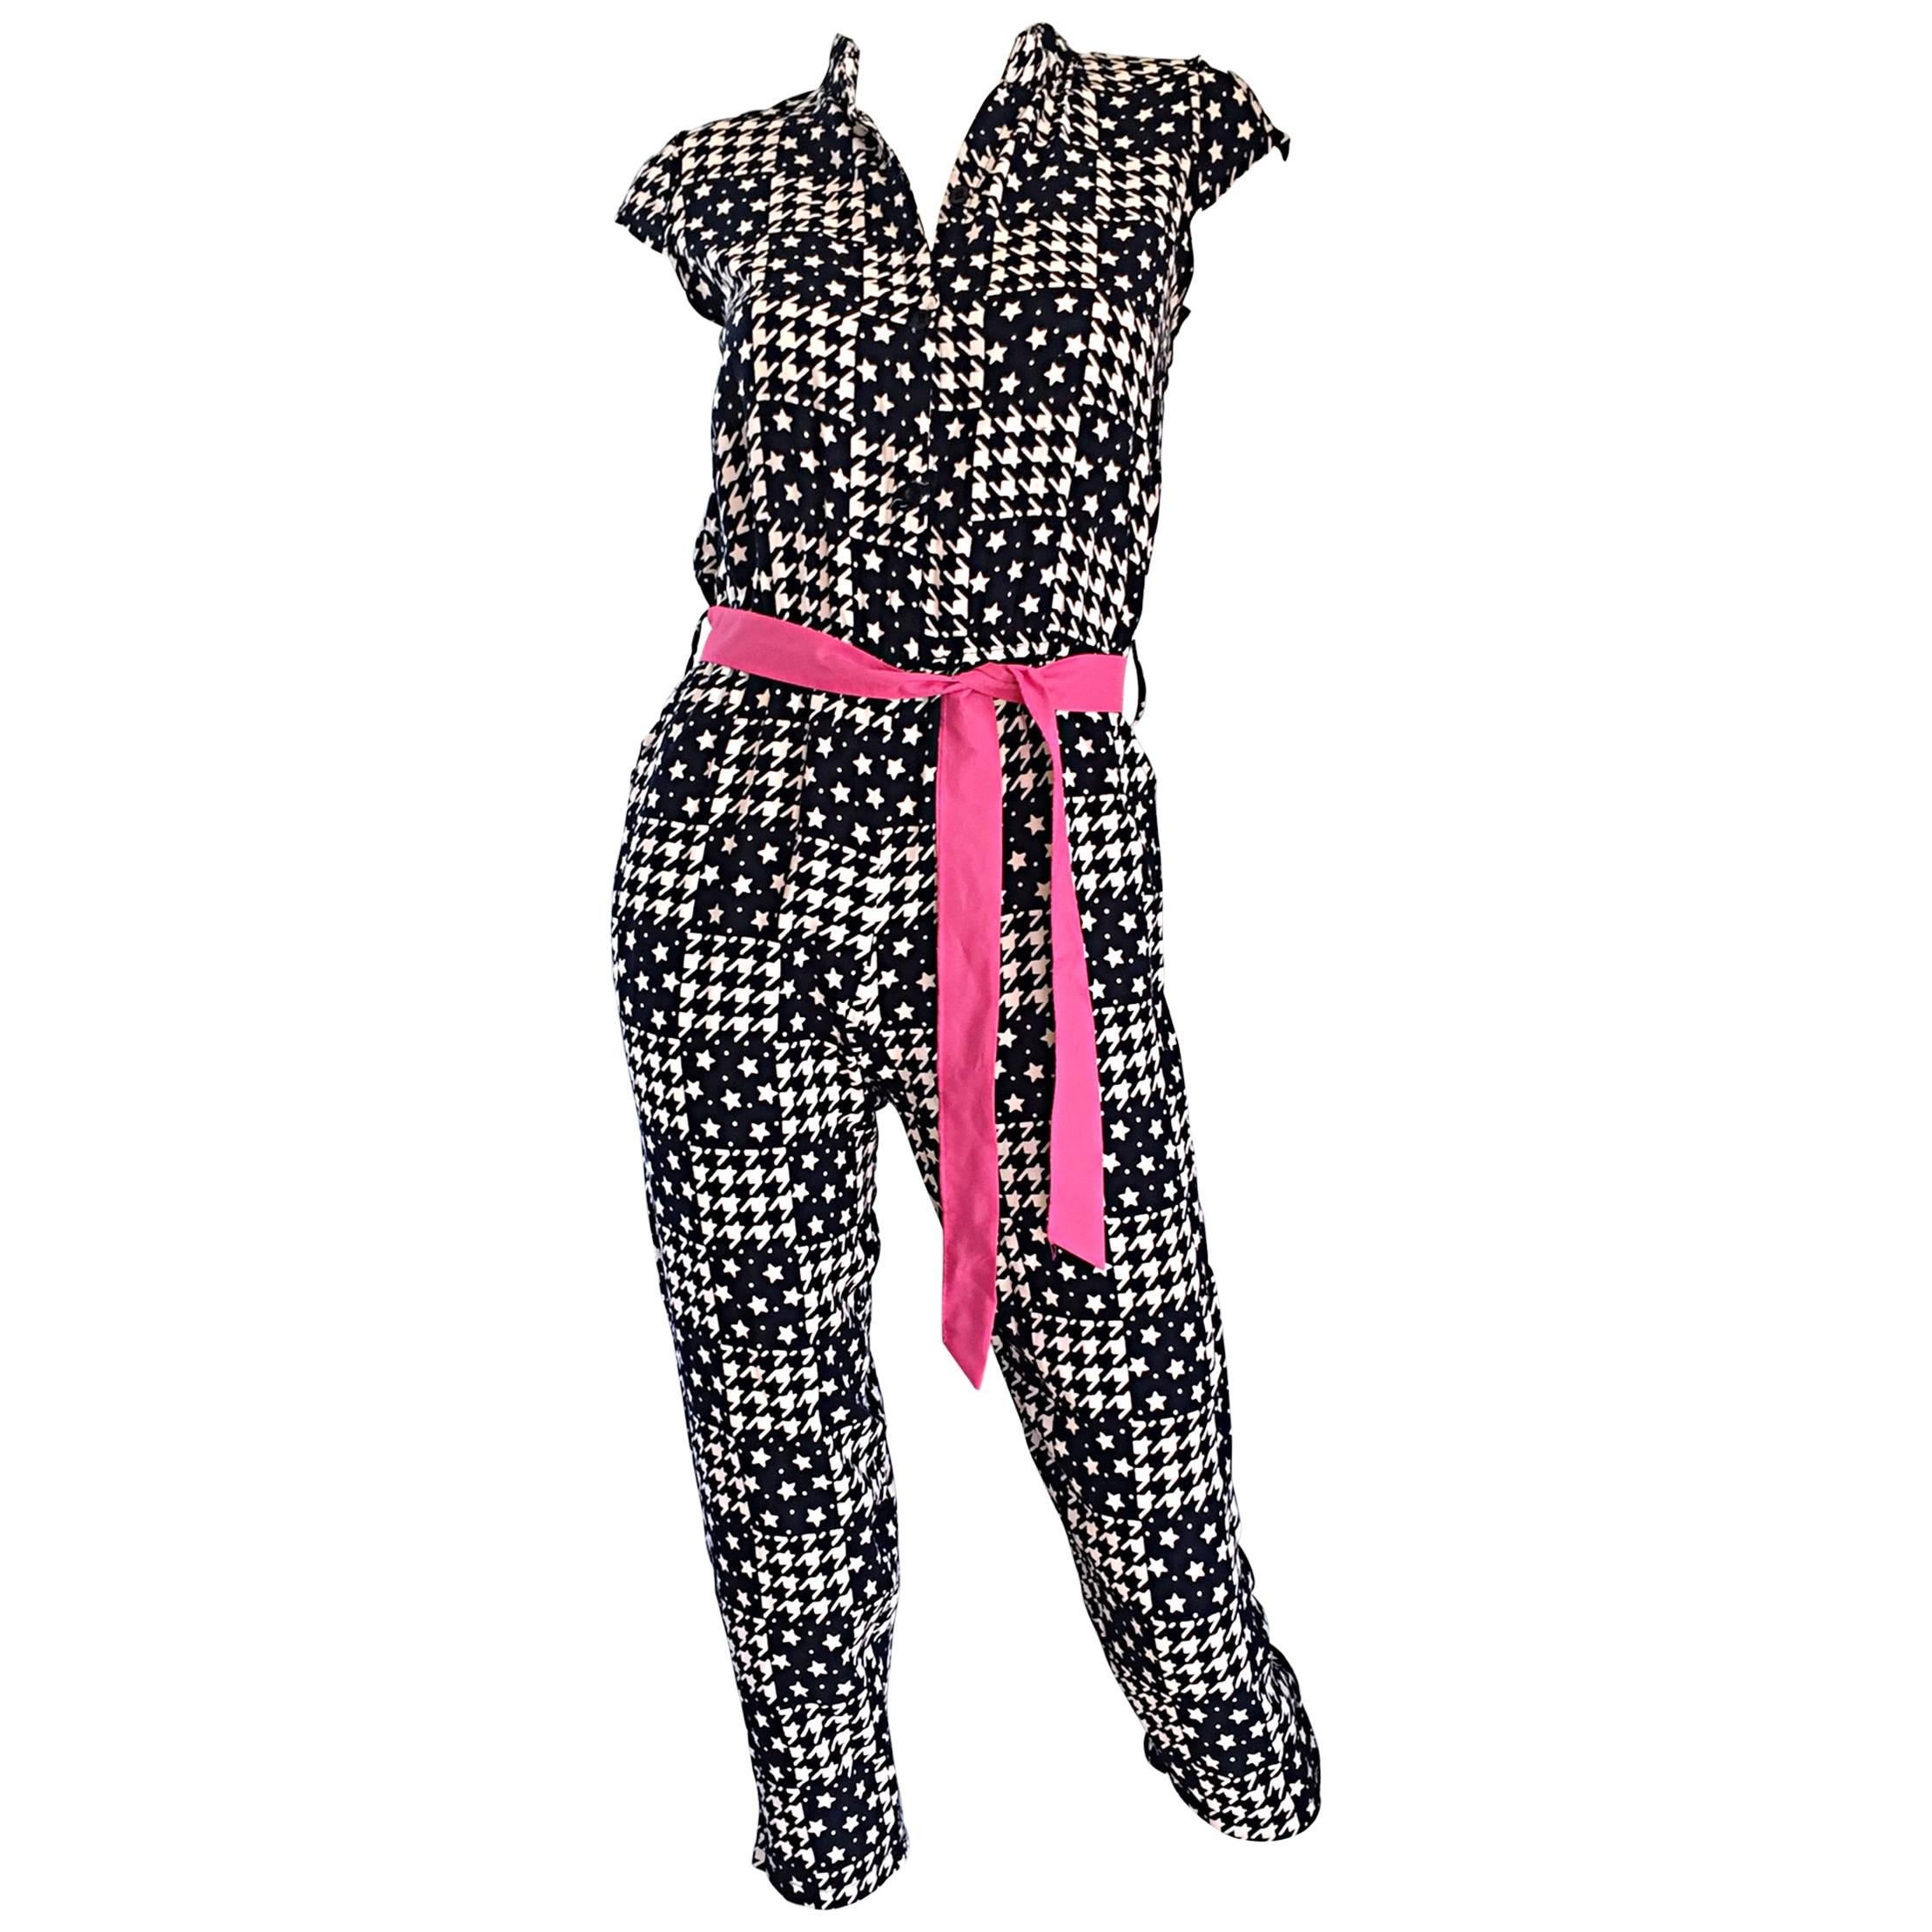 Amazing Vintage 80s Houndstooth and Star Print Navy White Jumpsuit w/ Pink Belt